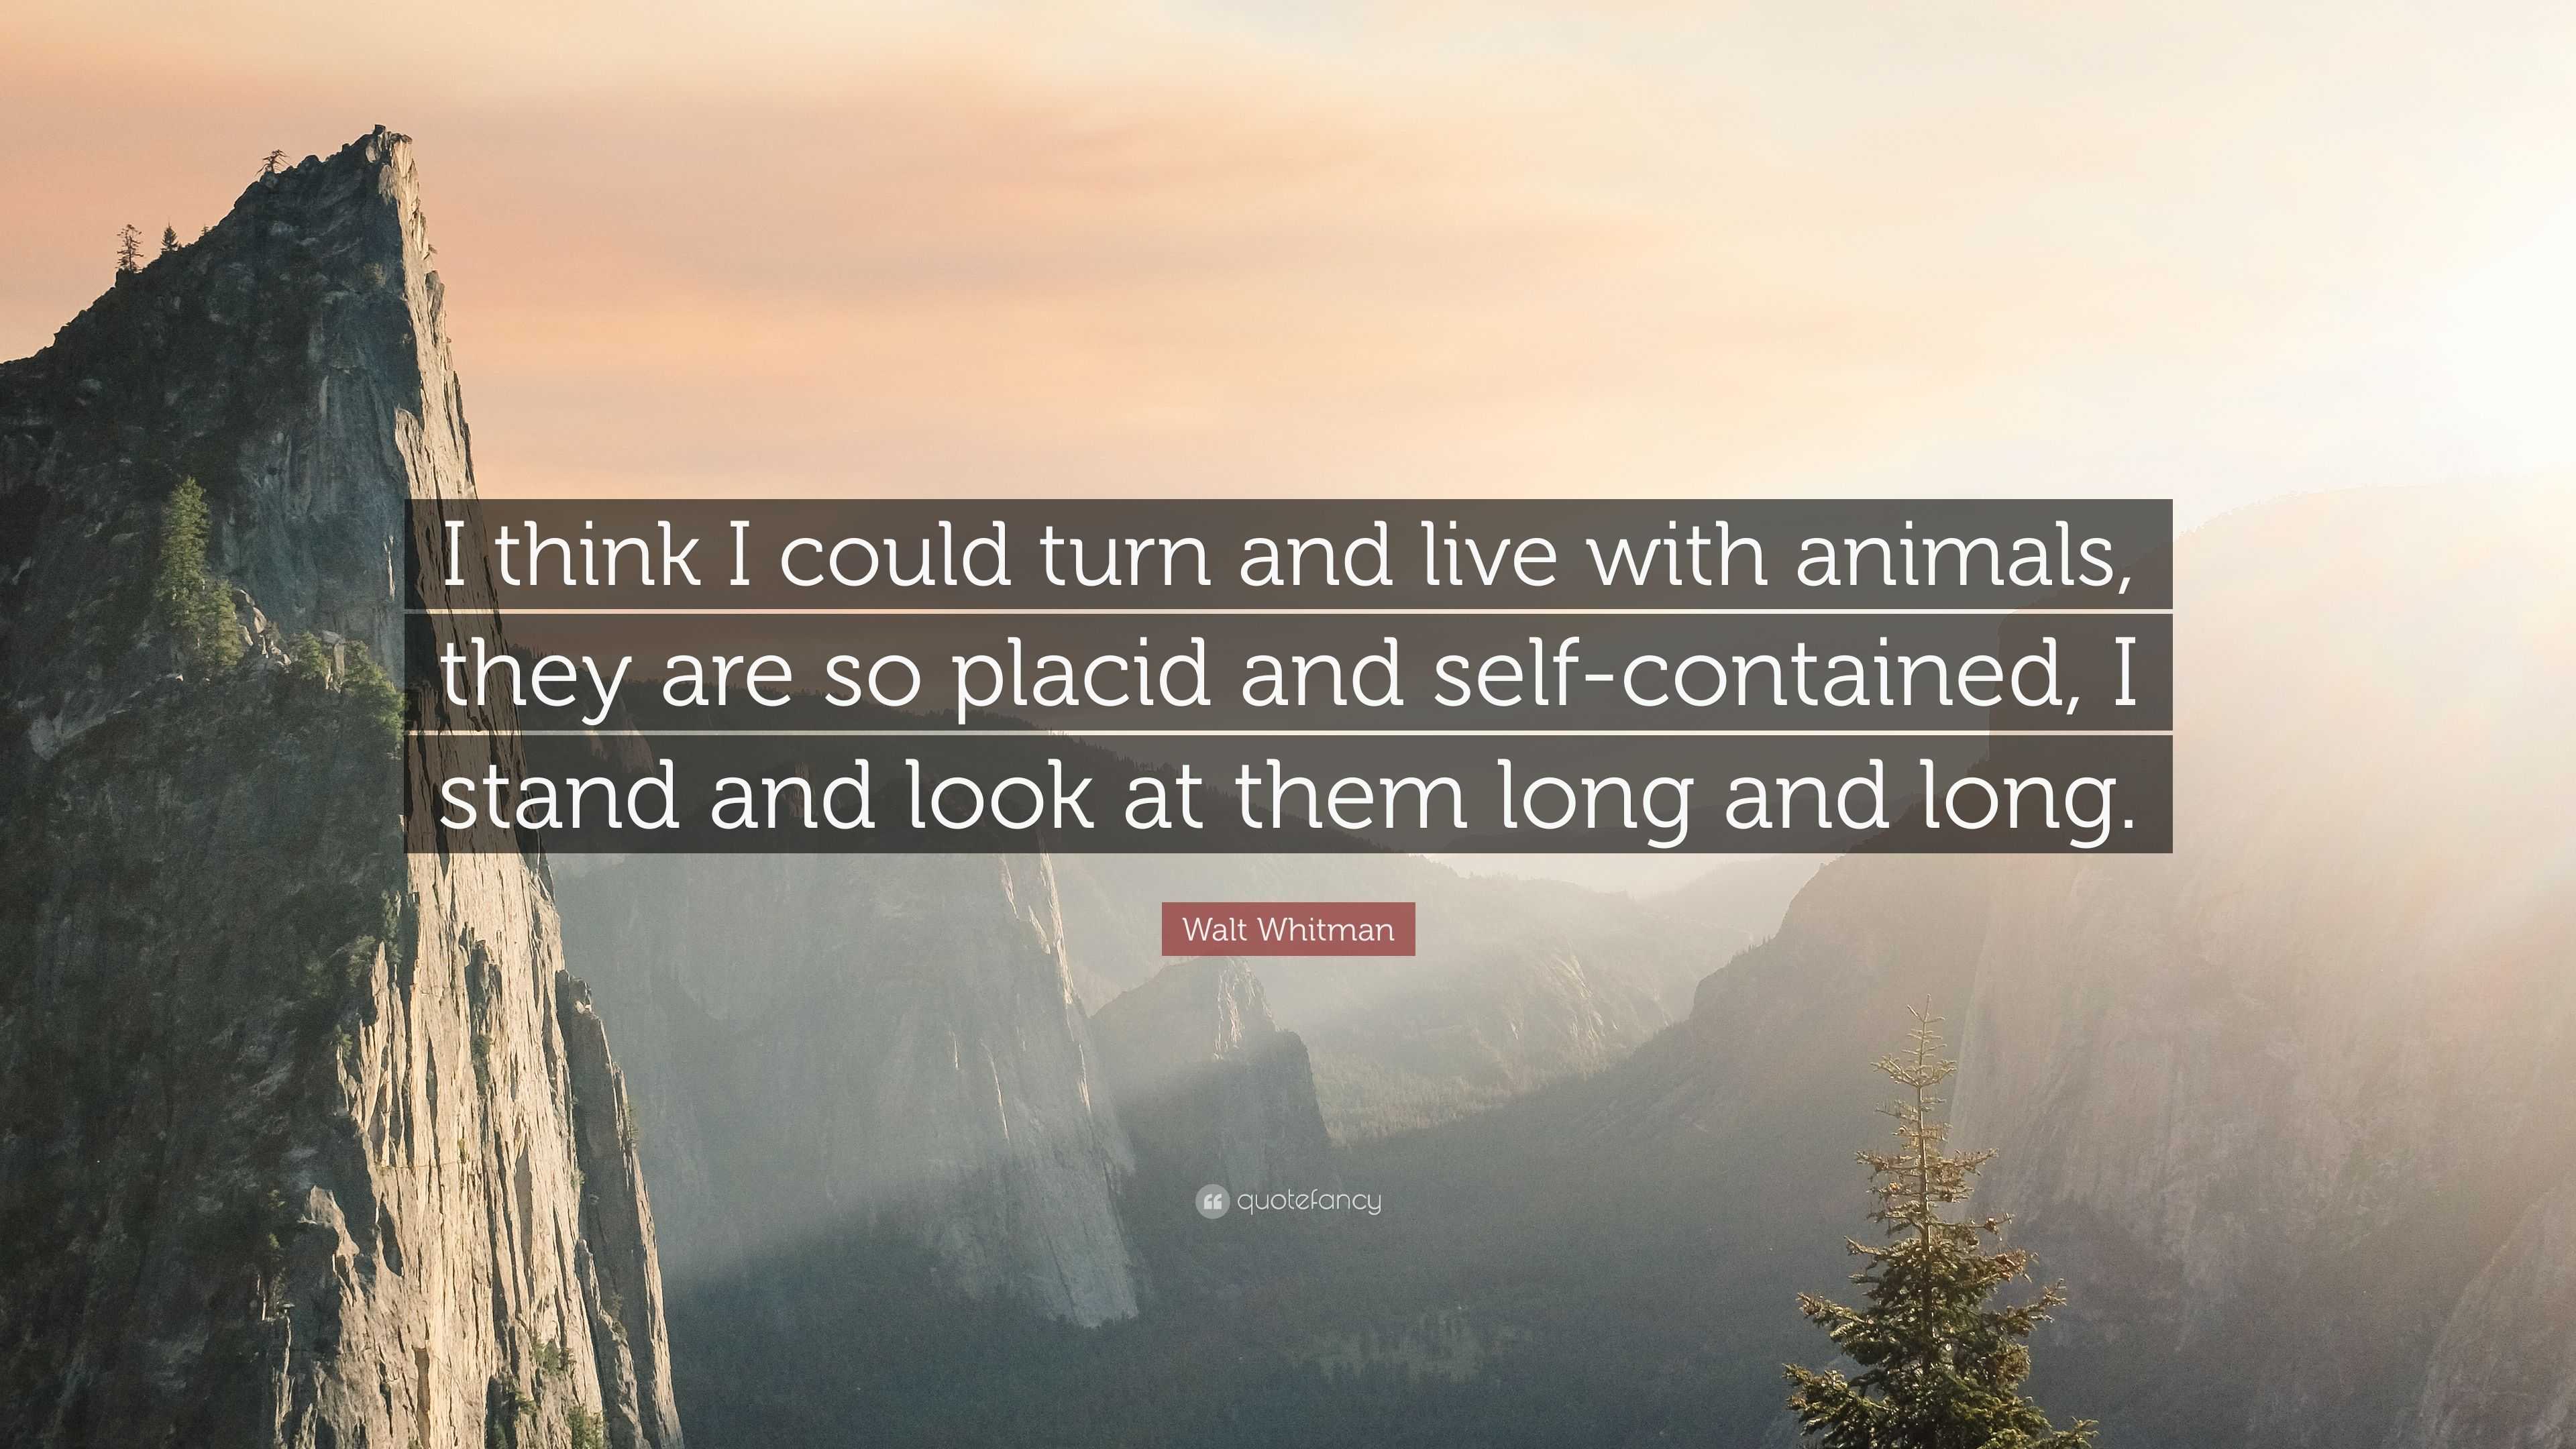 Walt Whitman Quote: “I think I could turn and live with animals, they are  so placid and self-contained, I stand and look at them long and lon...”